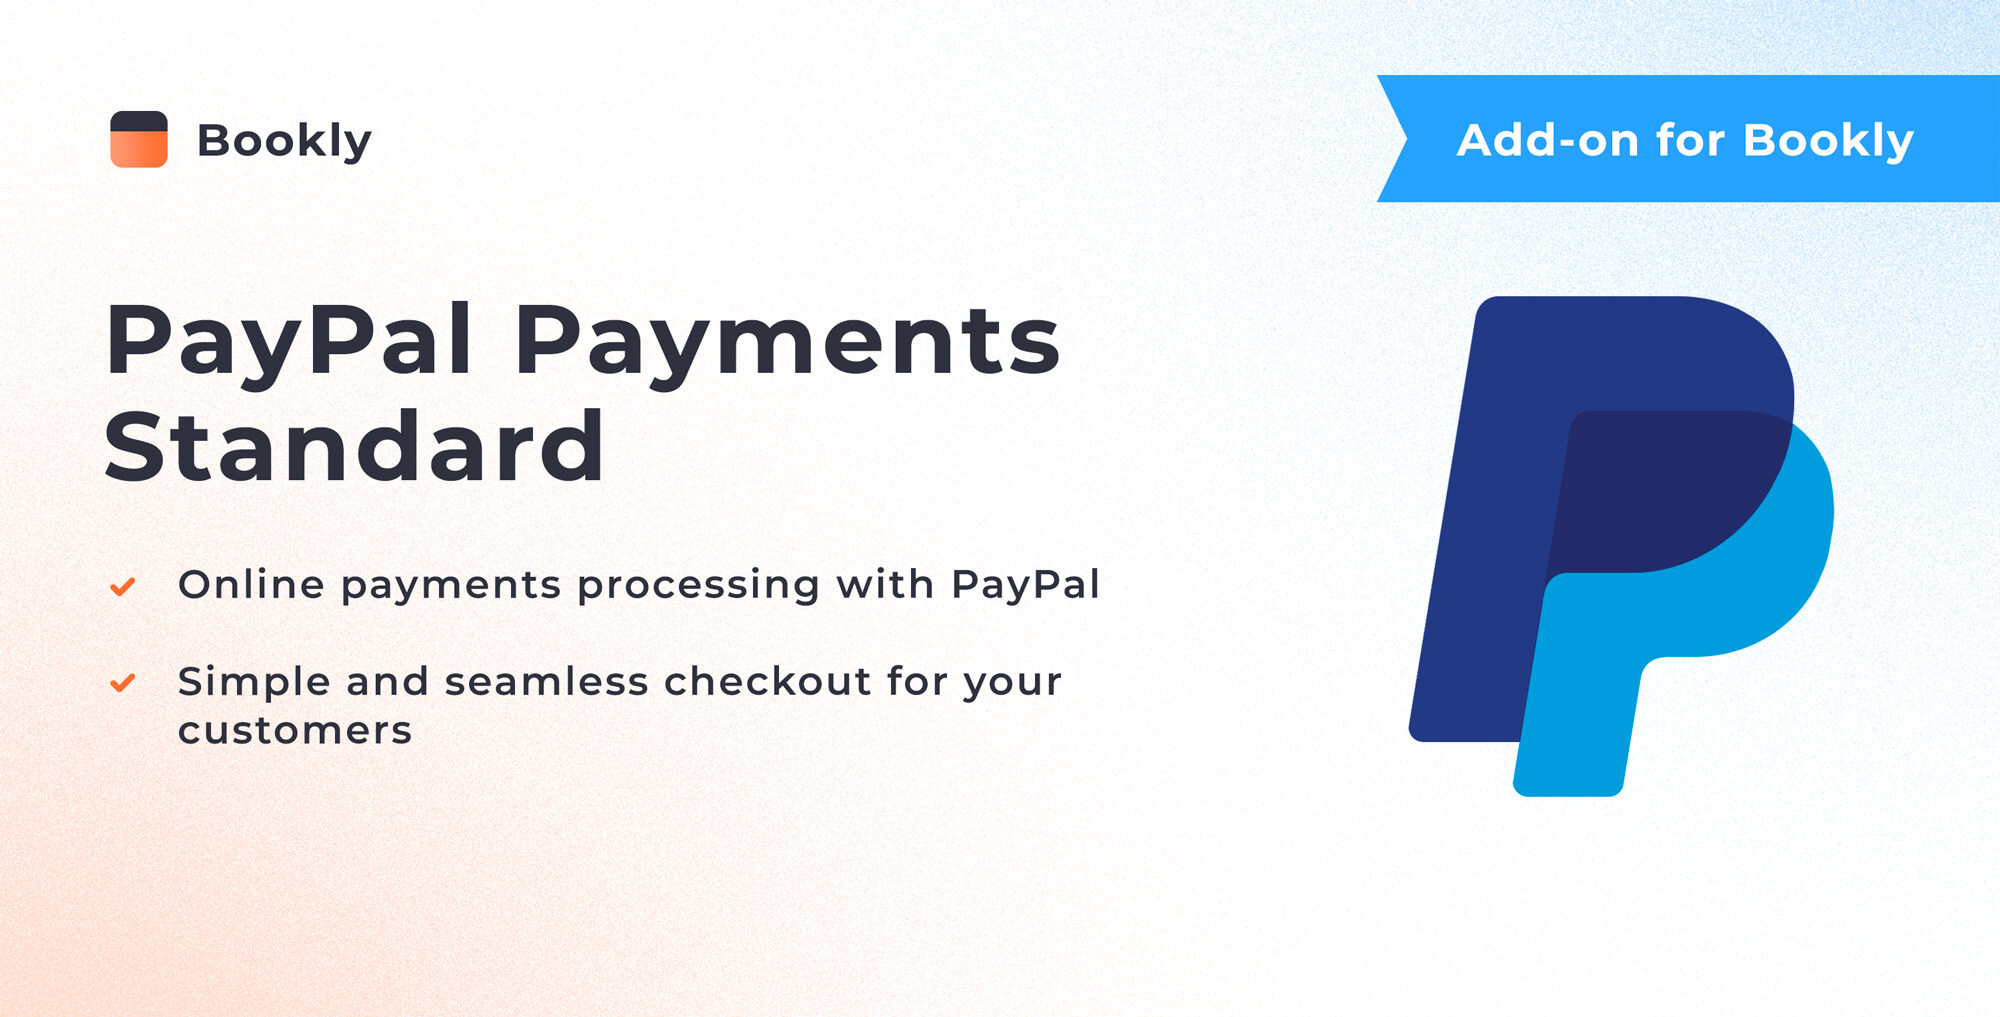 PayPal Payments Standard (Add-on)